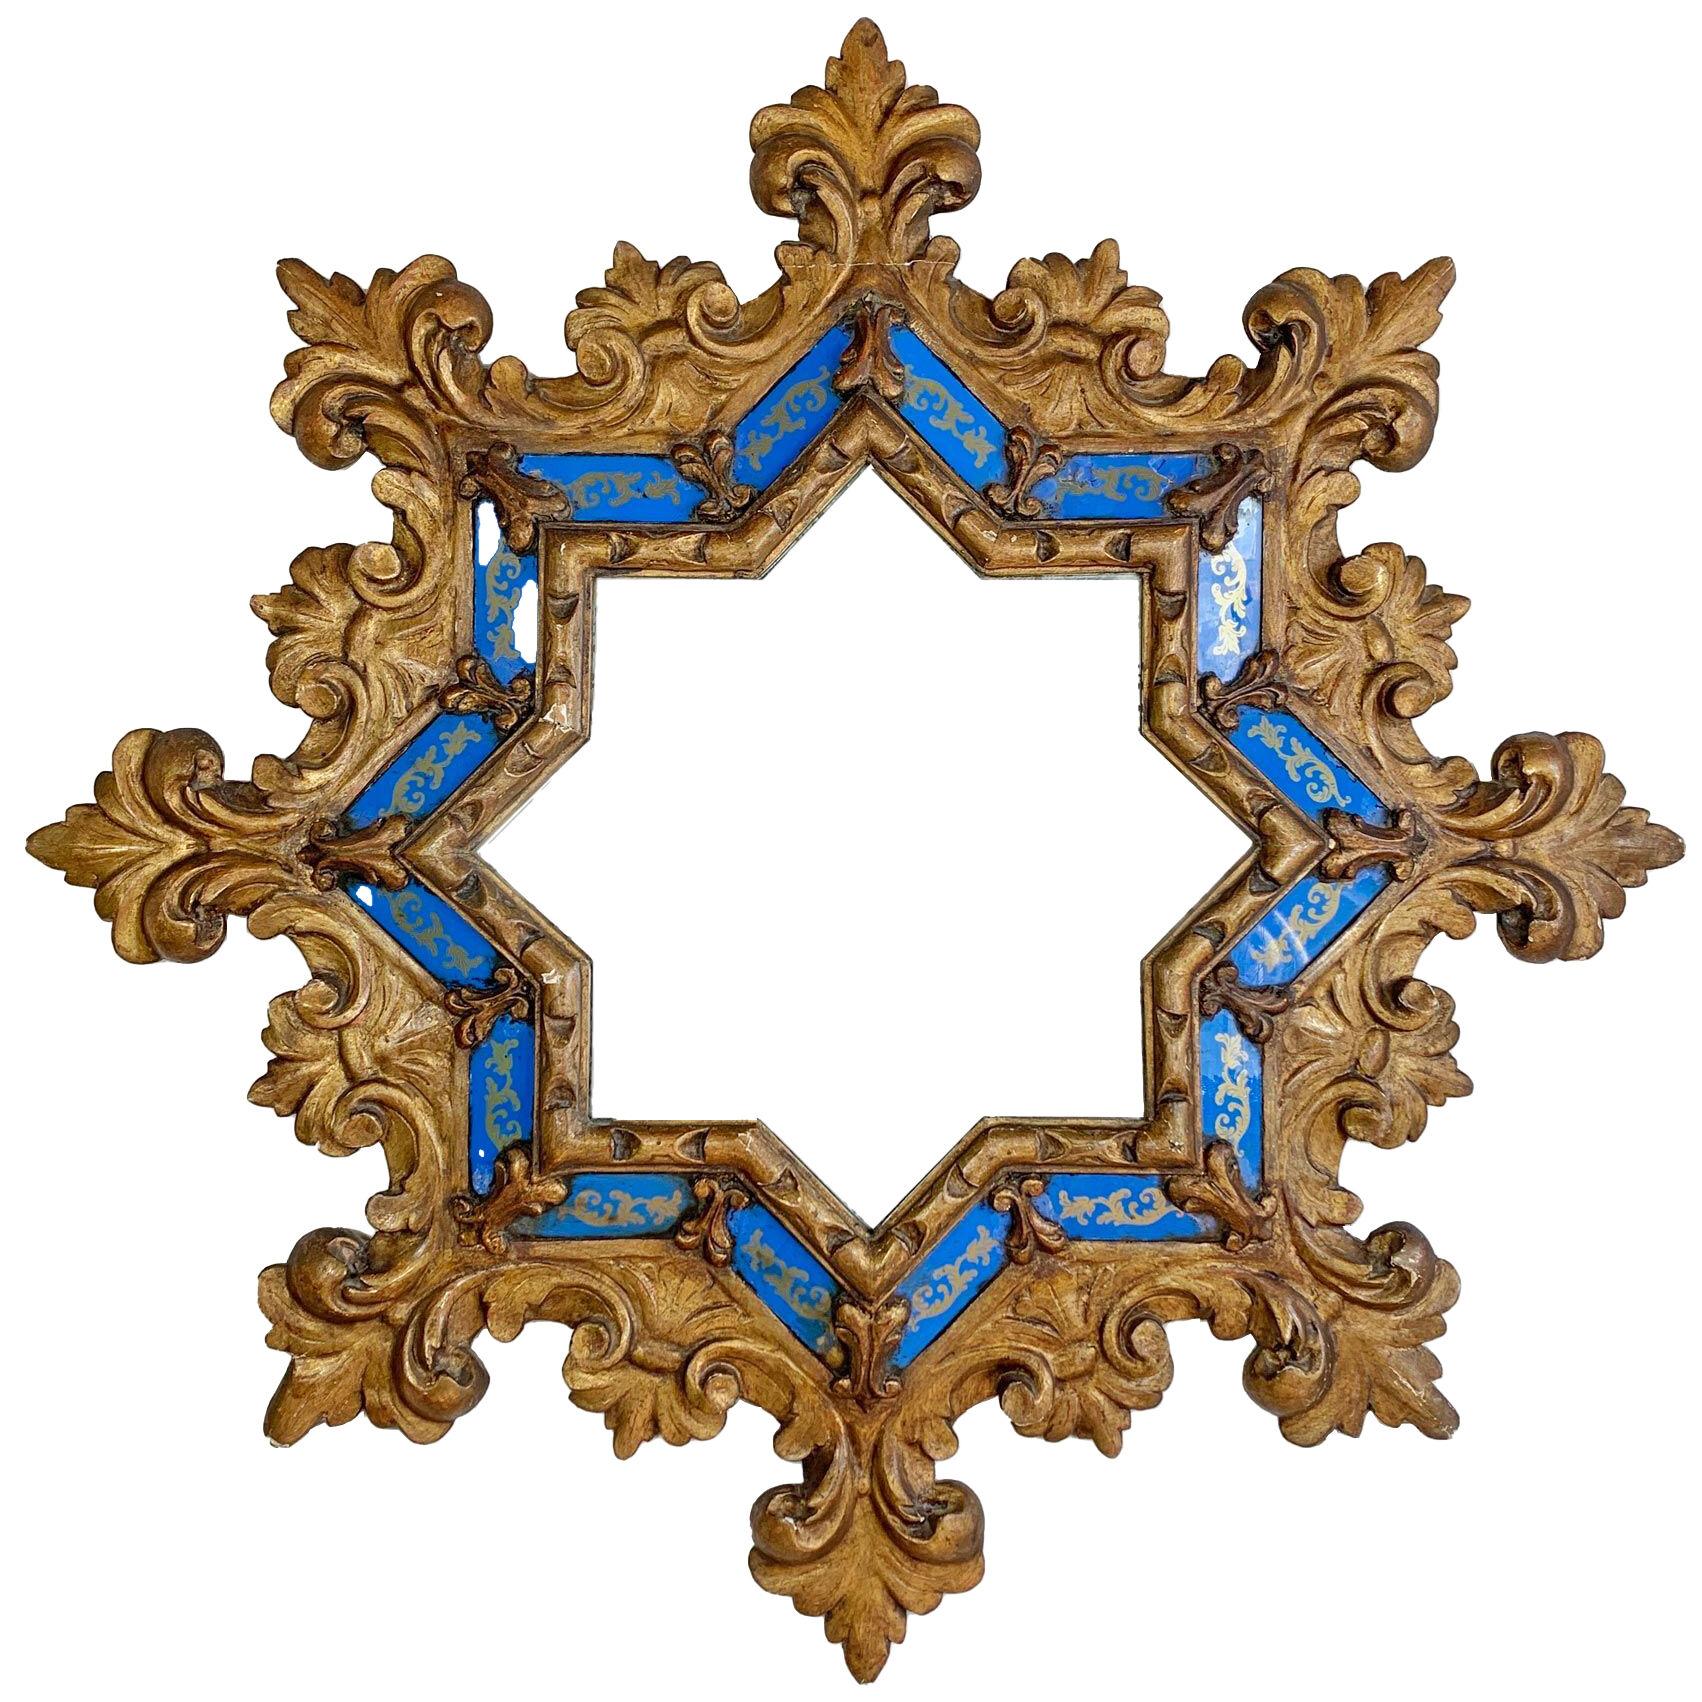 Stunning 19th C Italian Eglomise Starburst Mirror in Carved Wood and Gilt Gesso